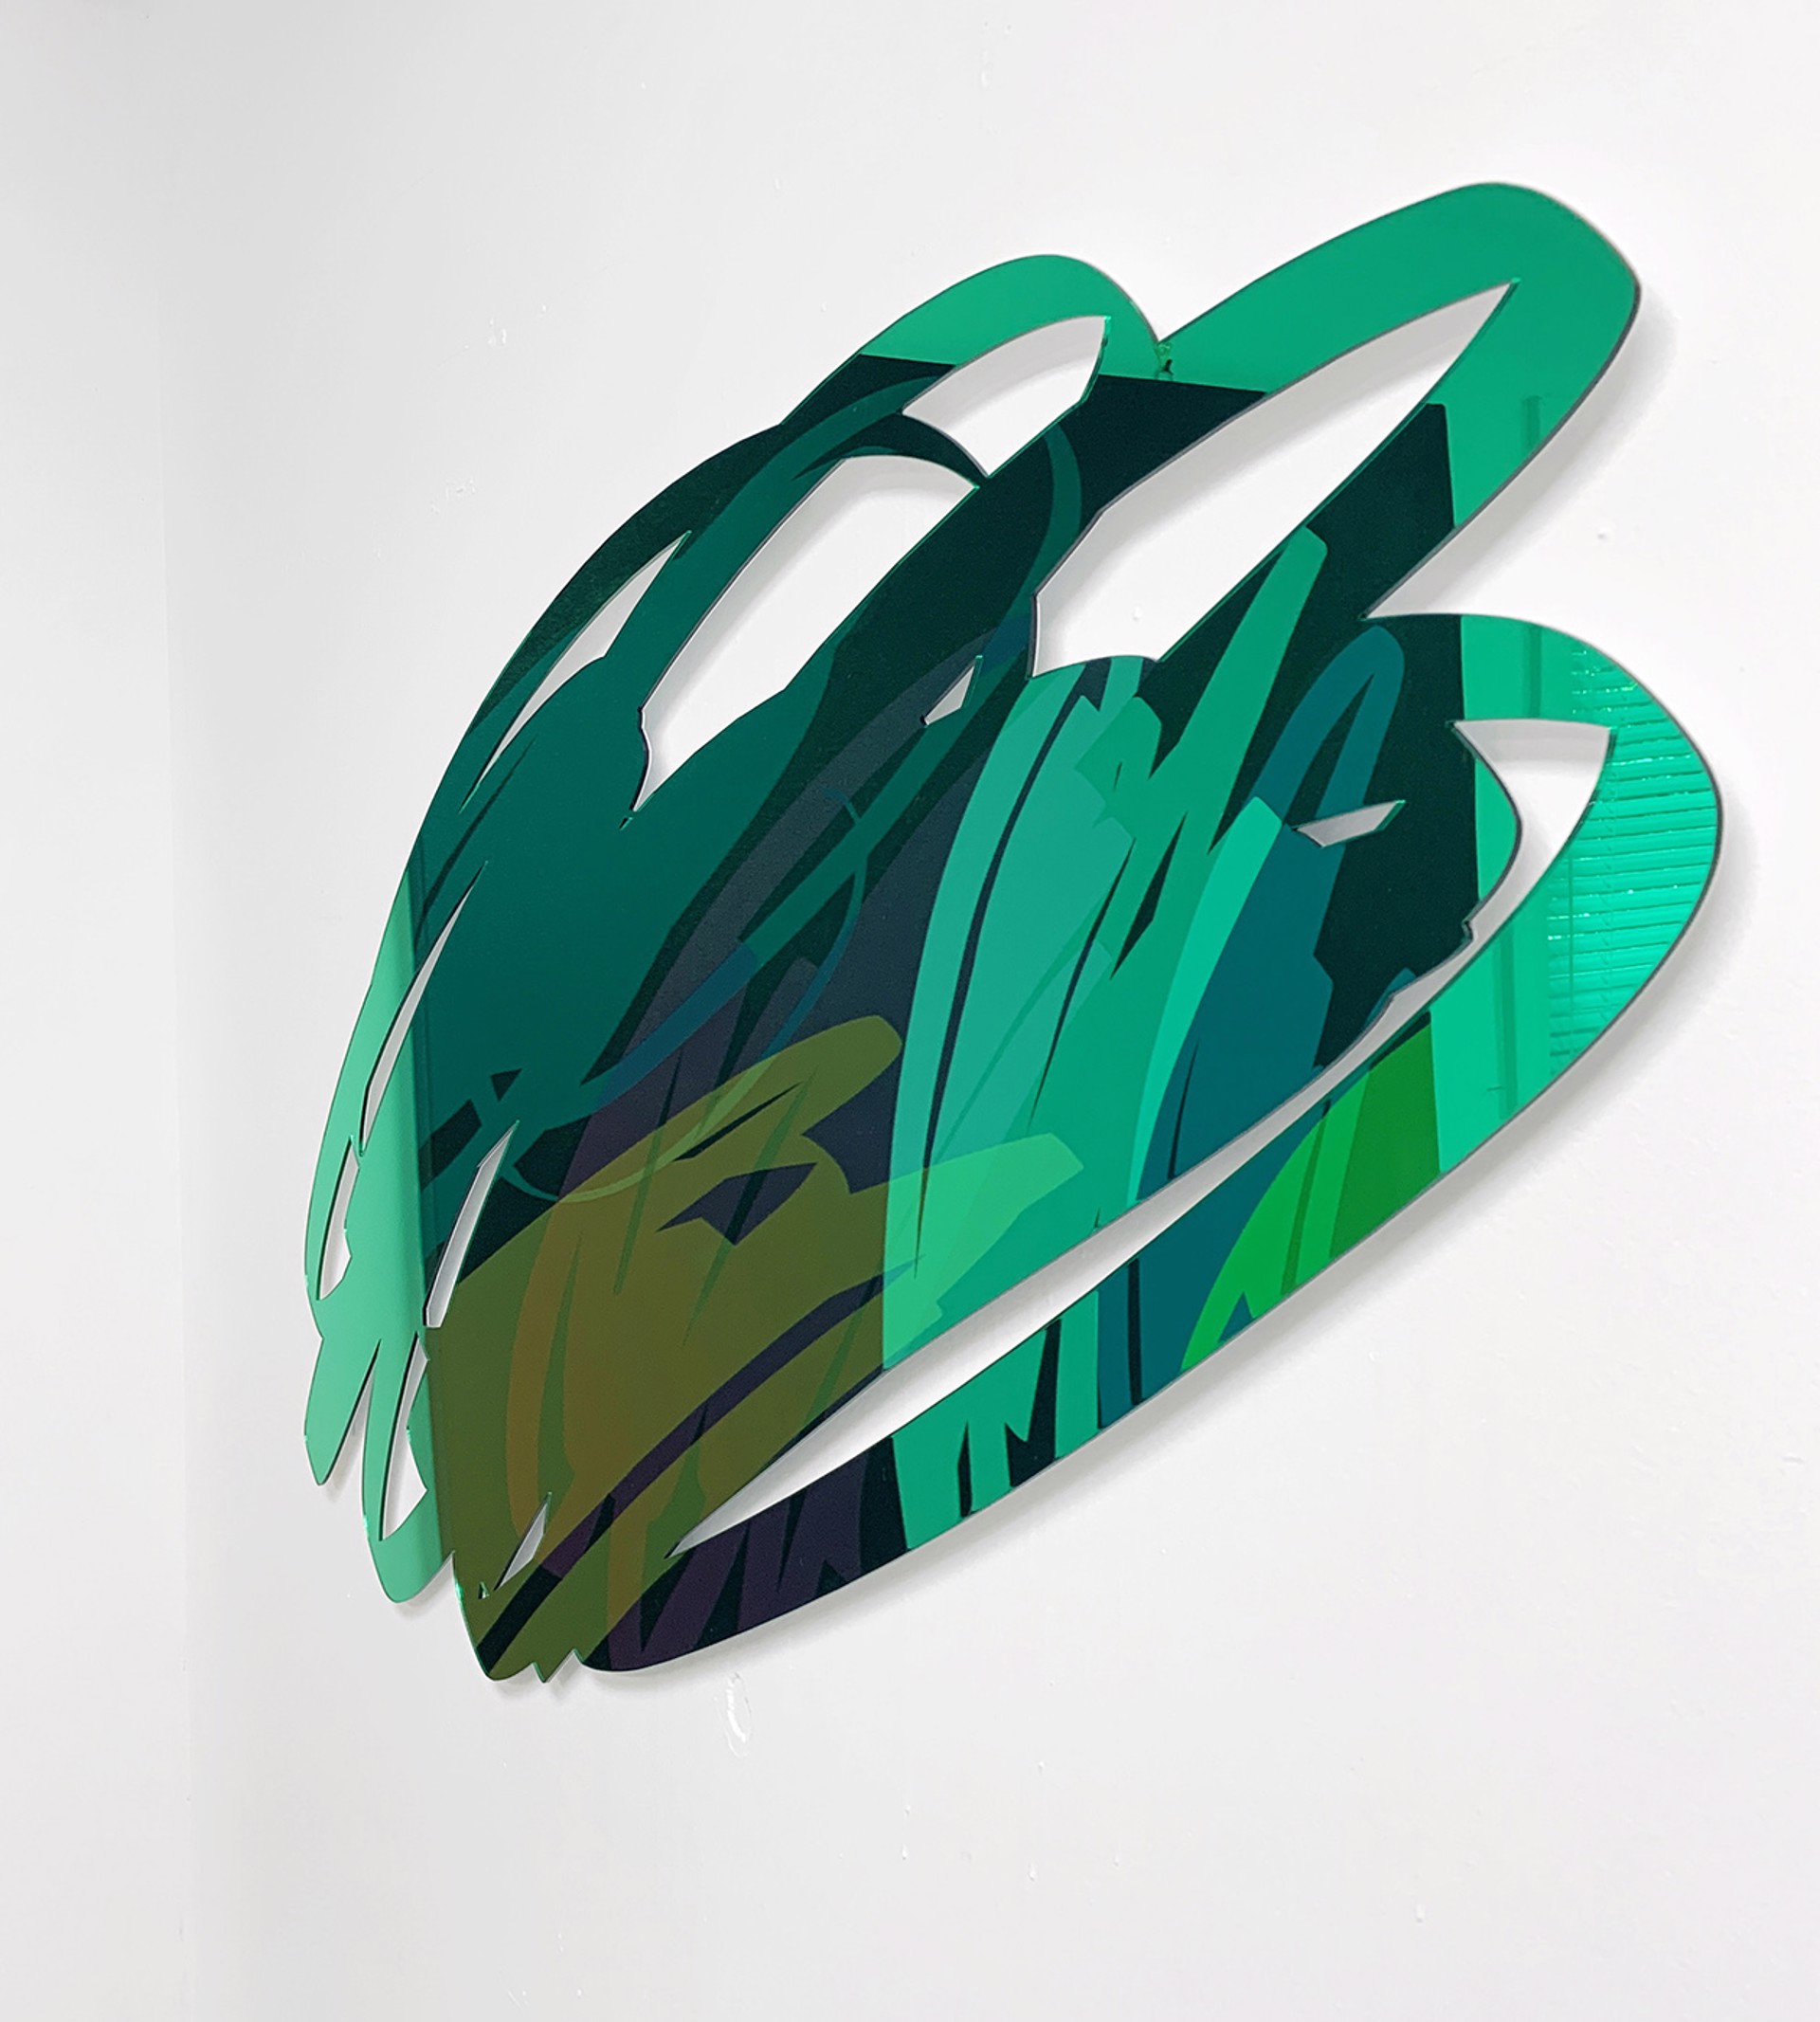 Green Scribble Mirror, Laser cut mirrored acrylic by Ryan Coleman